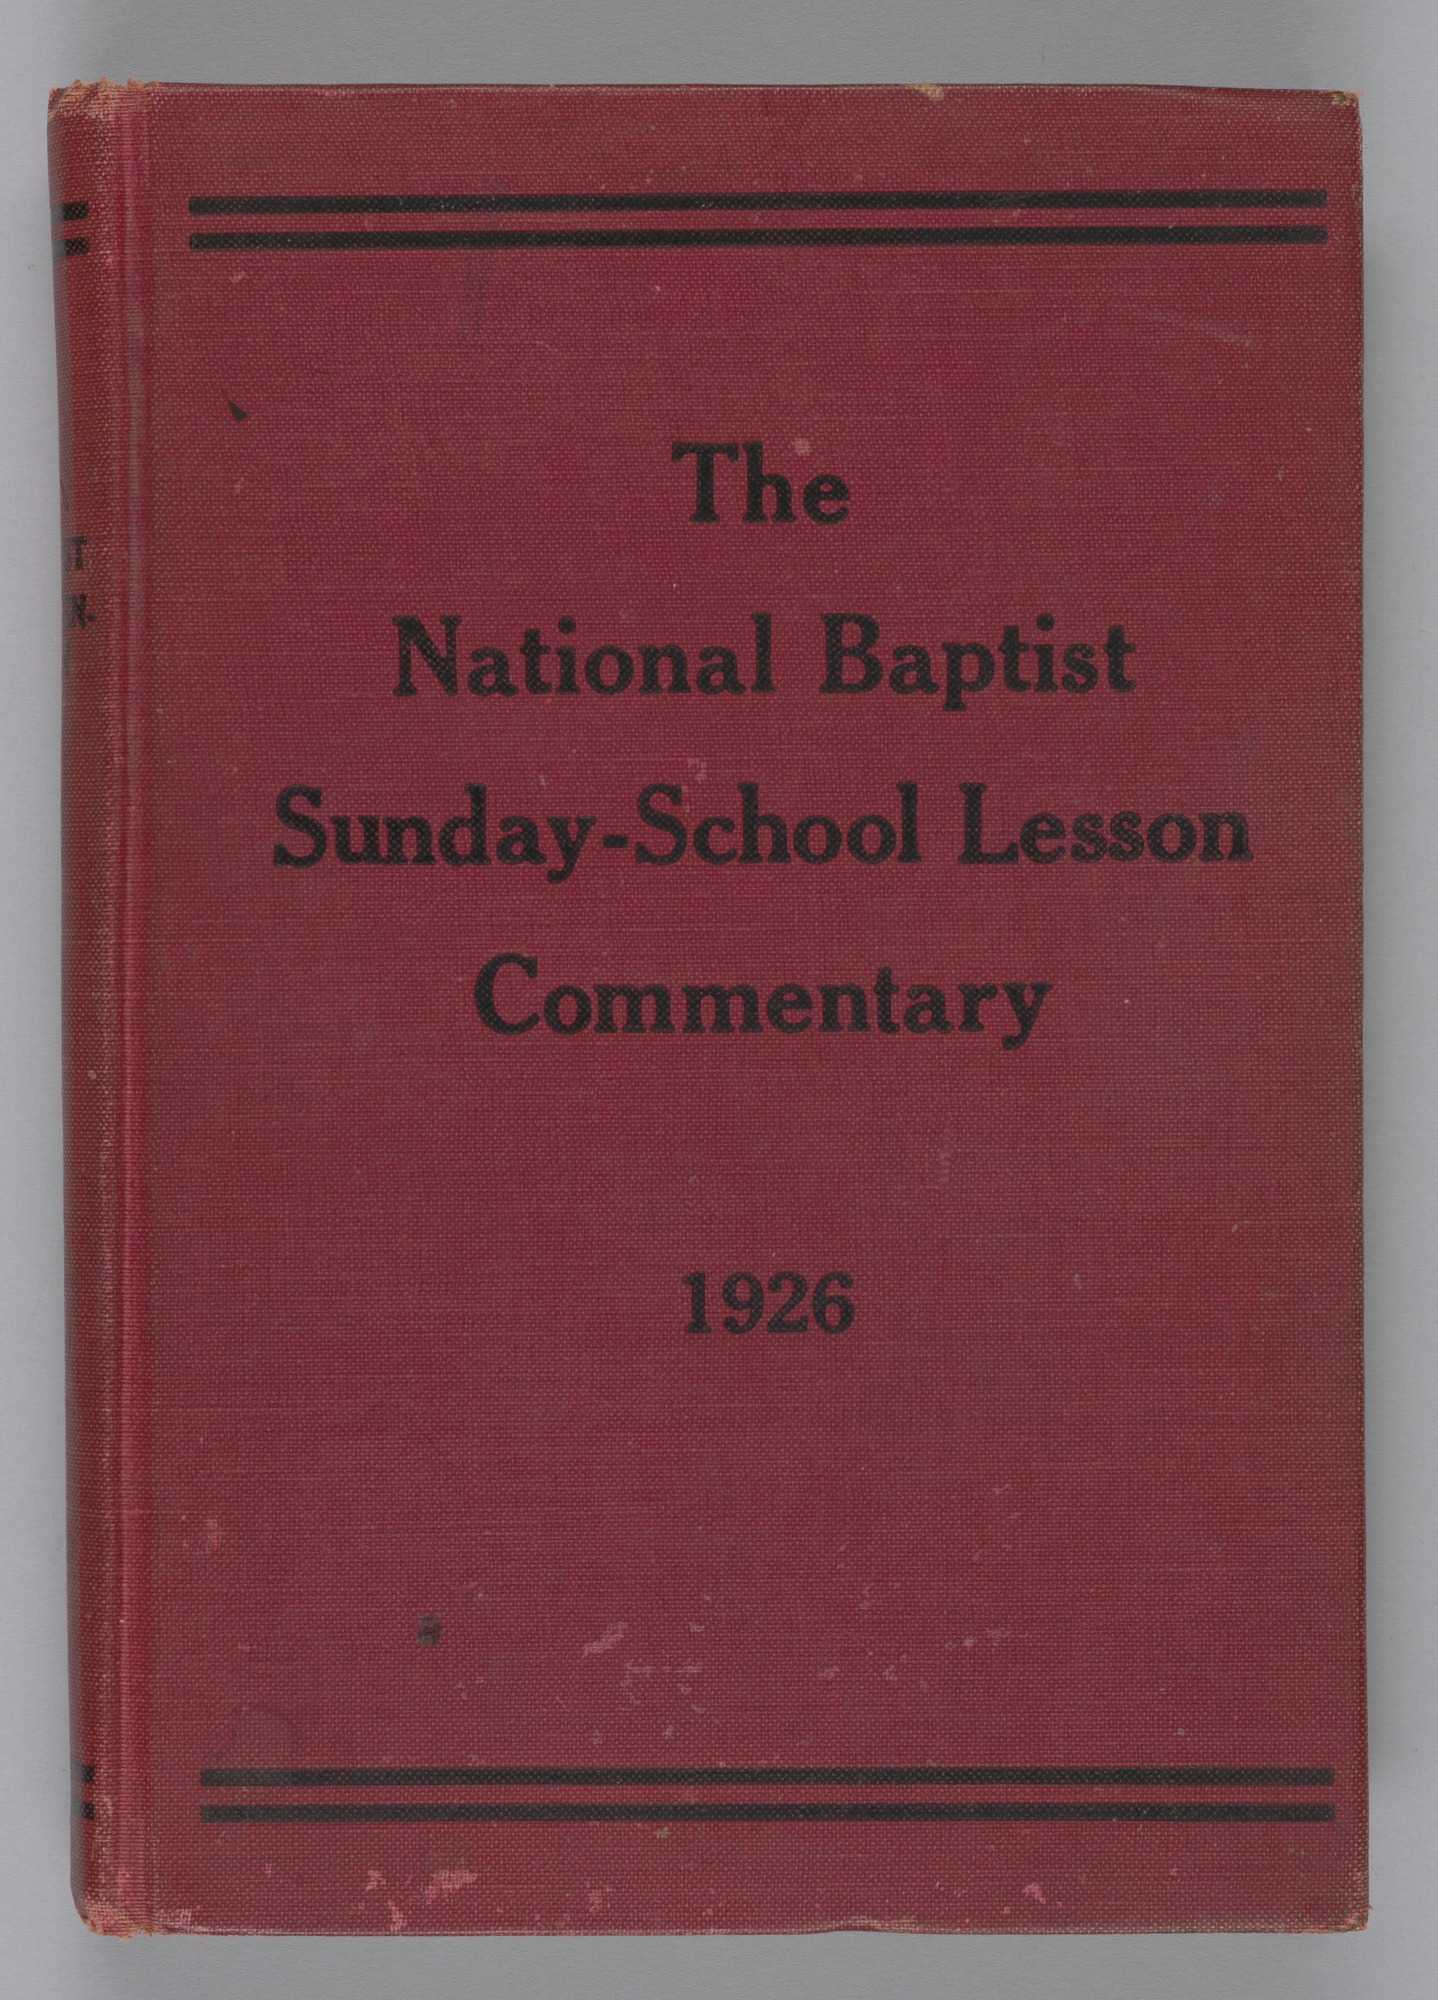 A red hardcover book titled The National Baptist Sunday-School Lesson Commentary.